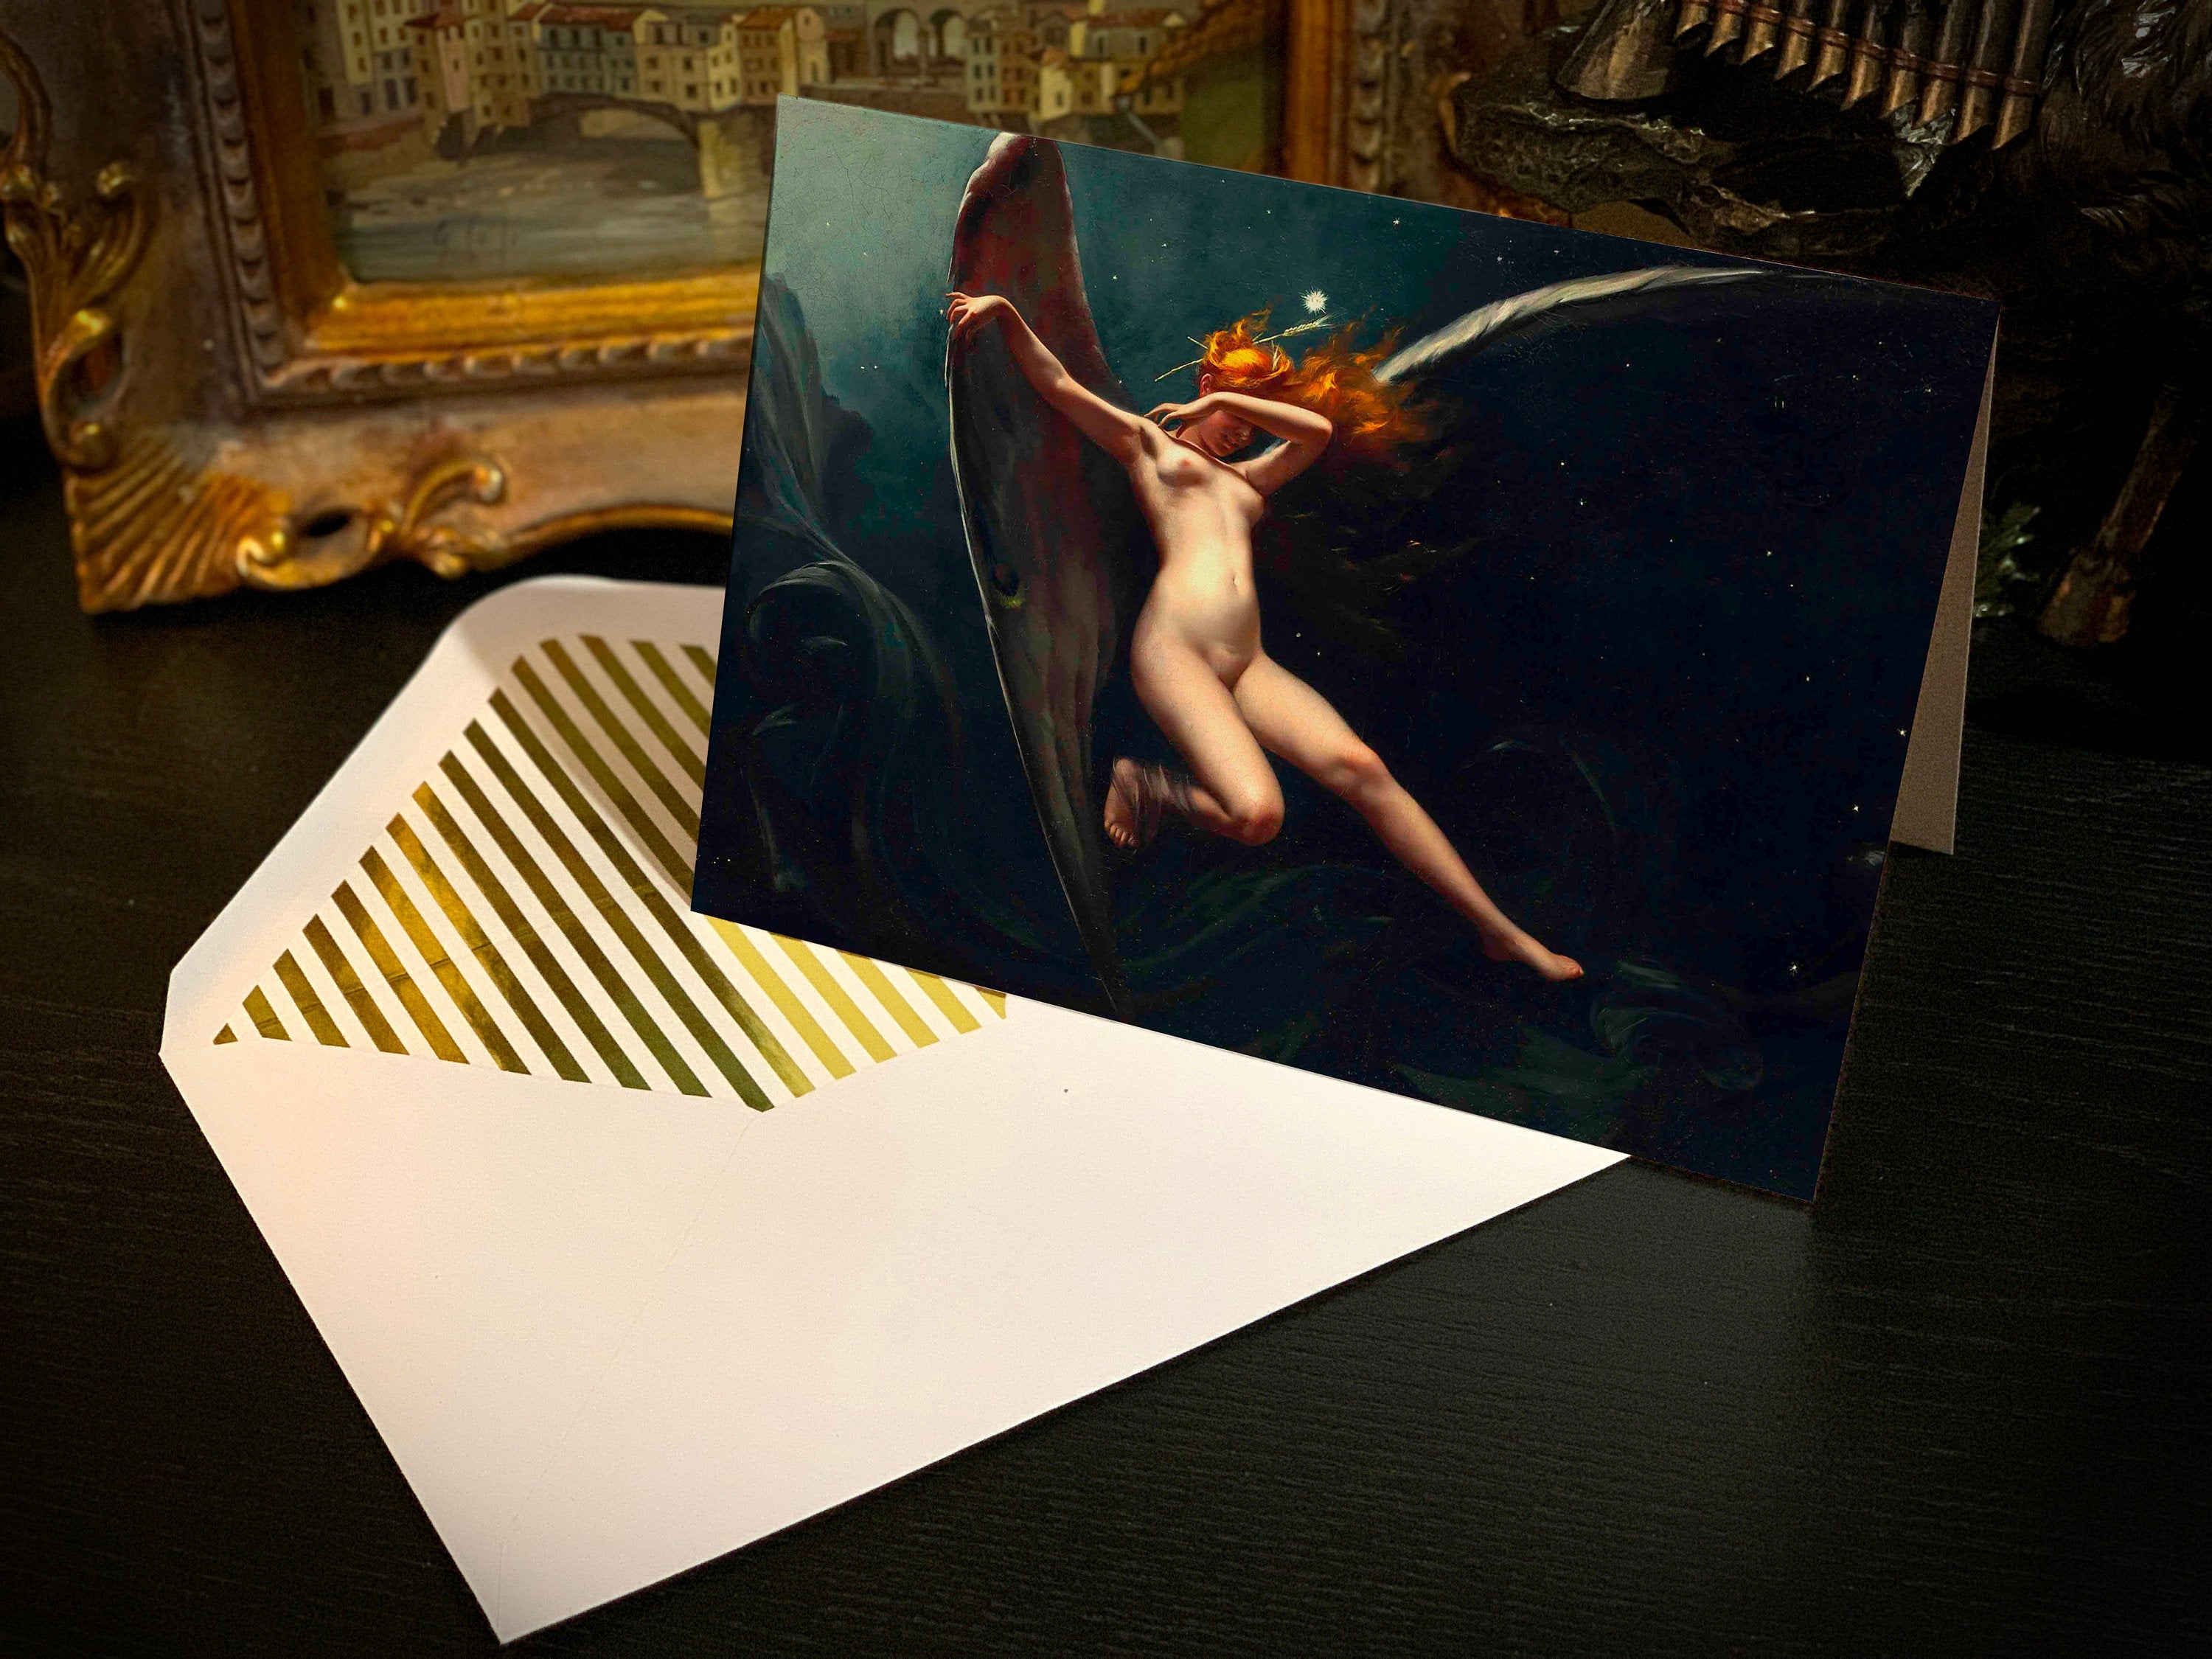 A Fairy Under Starry Skies by Luis Ricardo Falero, Greeting Card with Elegant Striped Gold Foil Envelope, 1 Card/Envelope